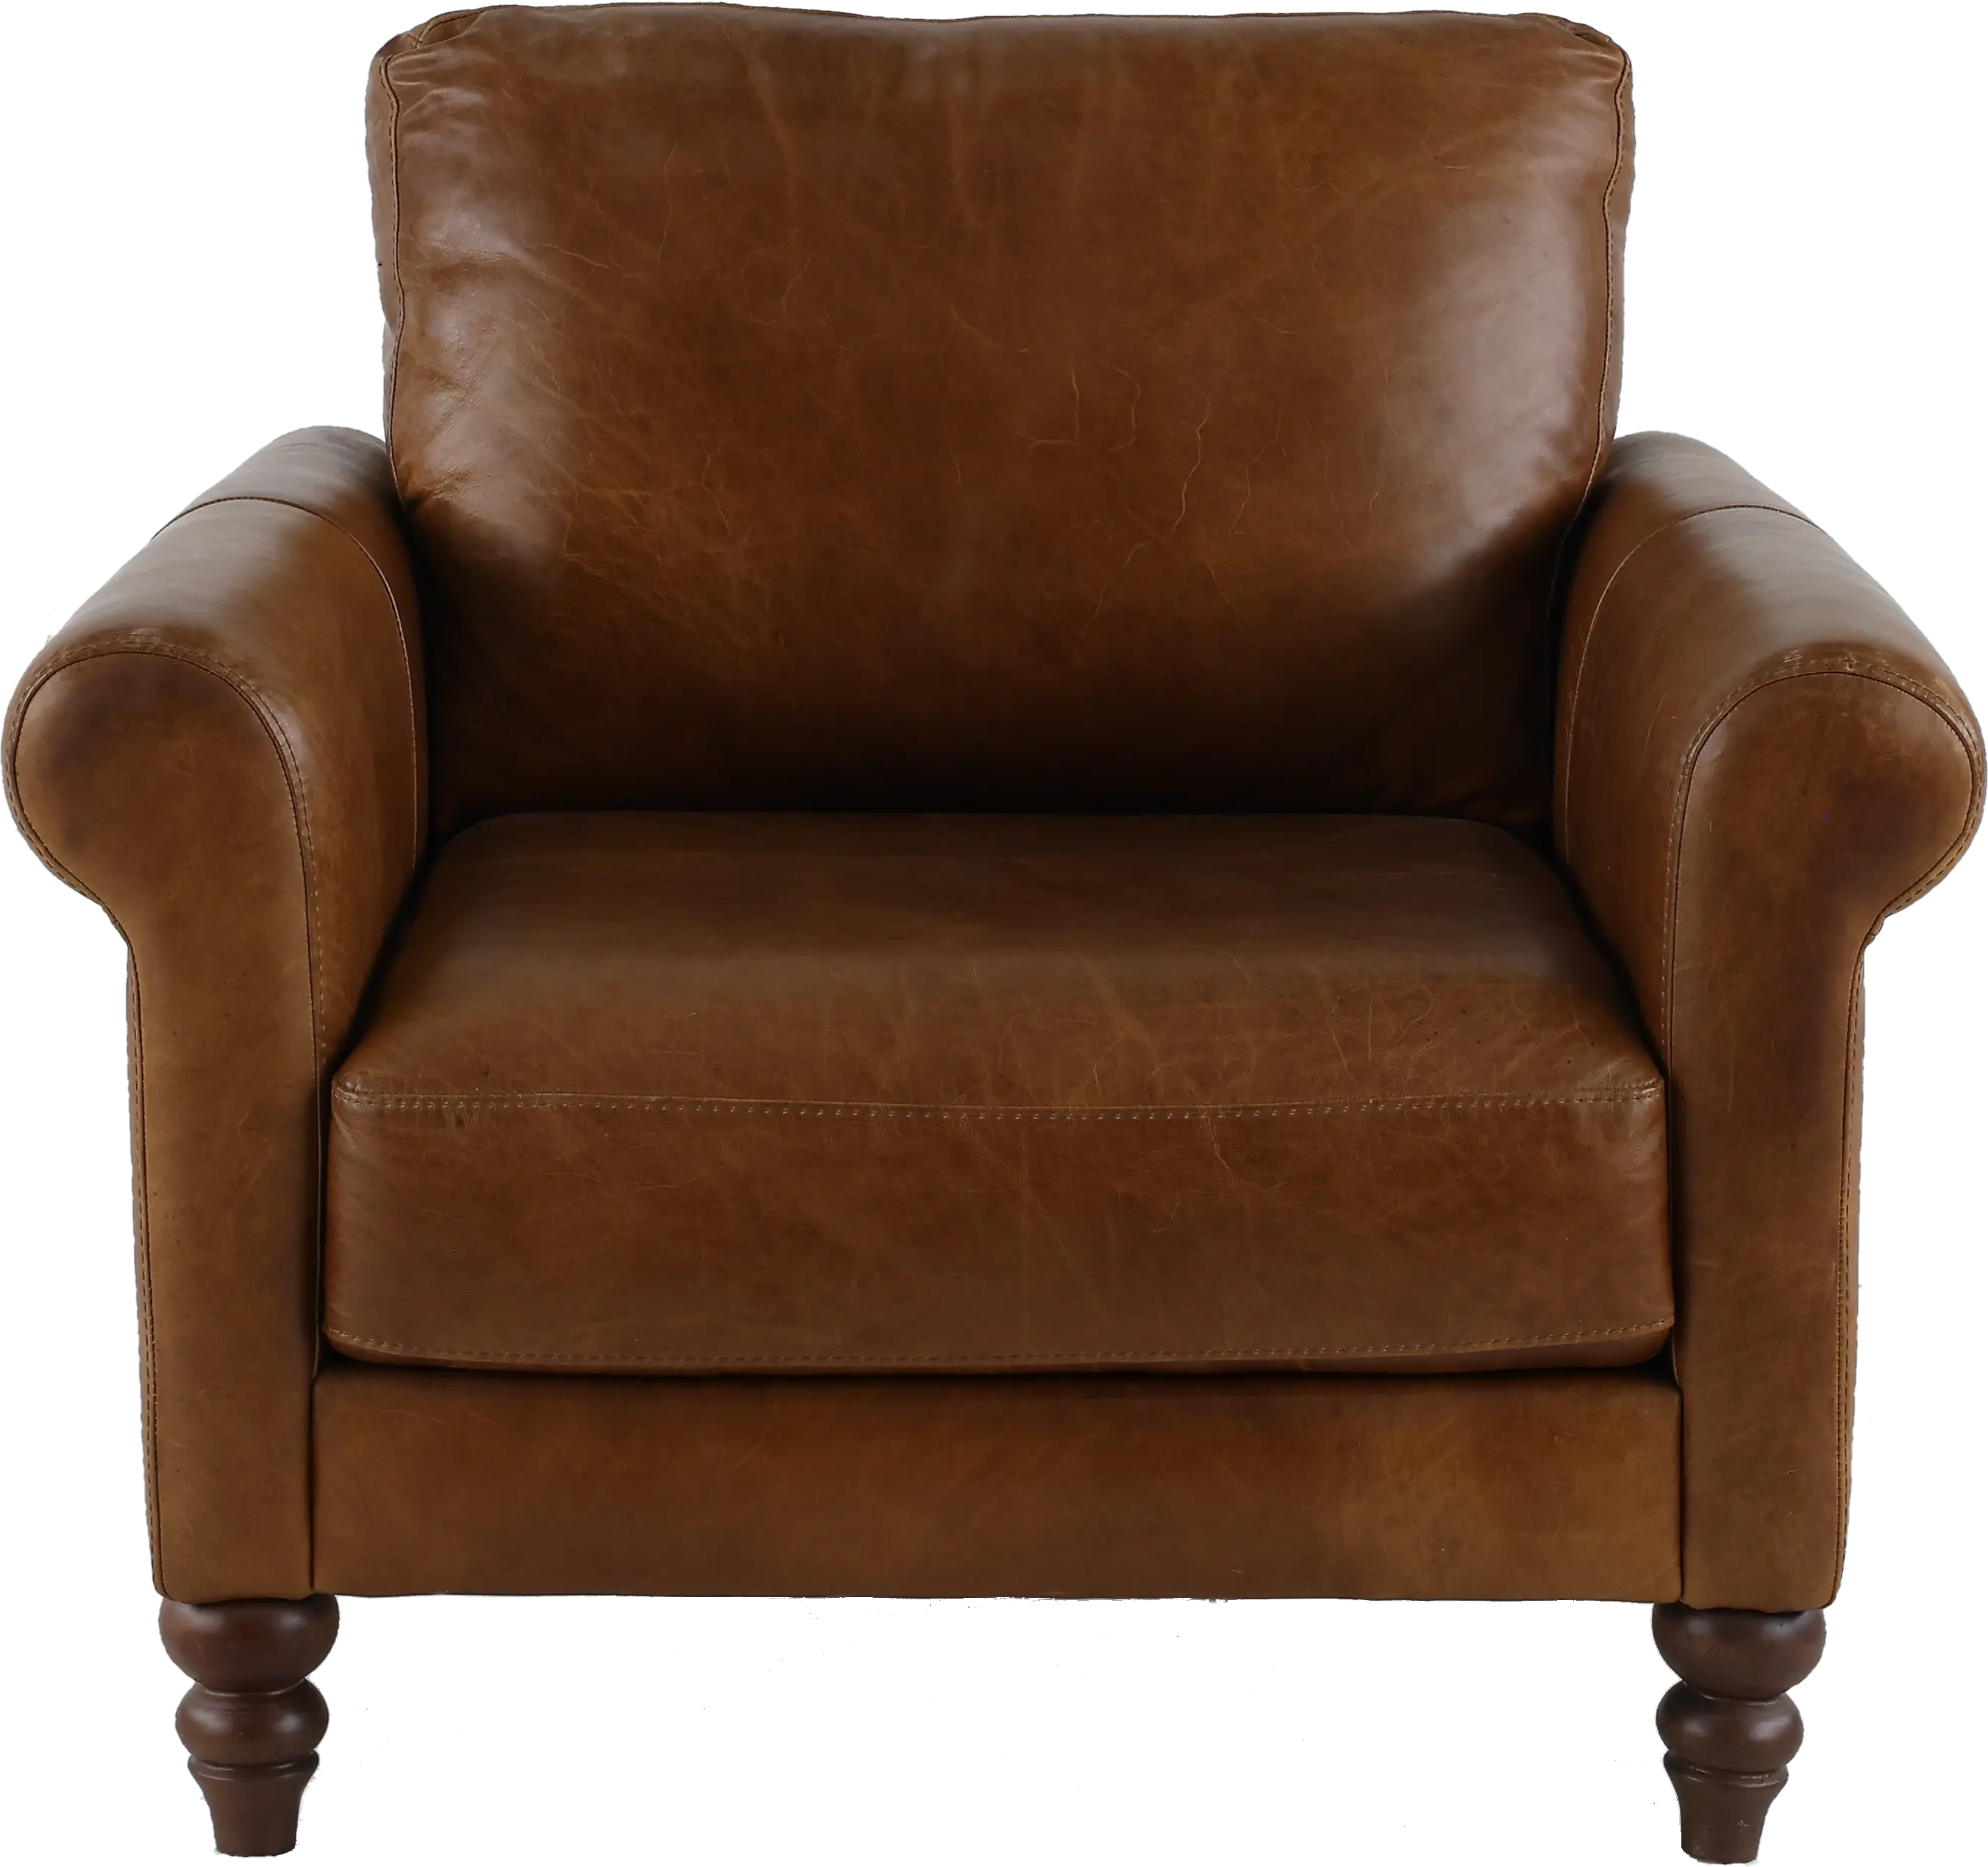 Dallas Brown Leather Chair